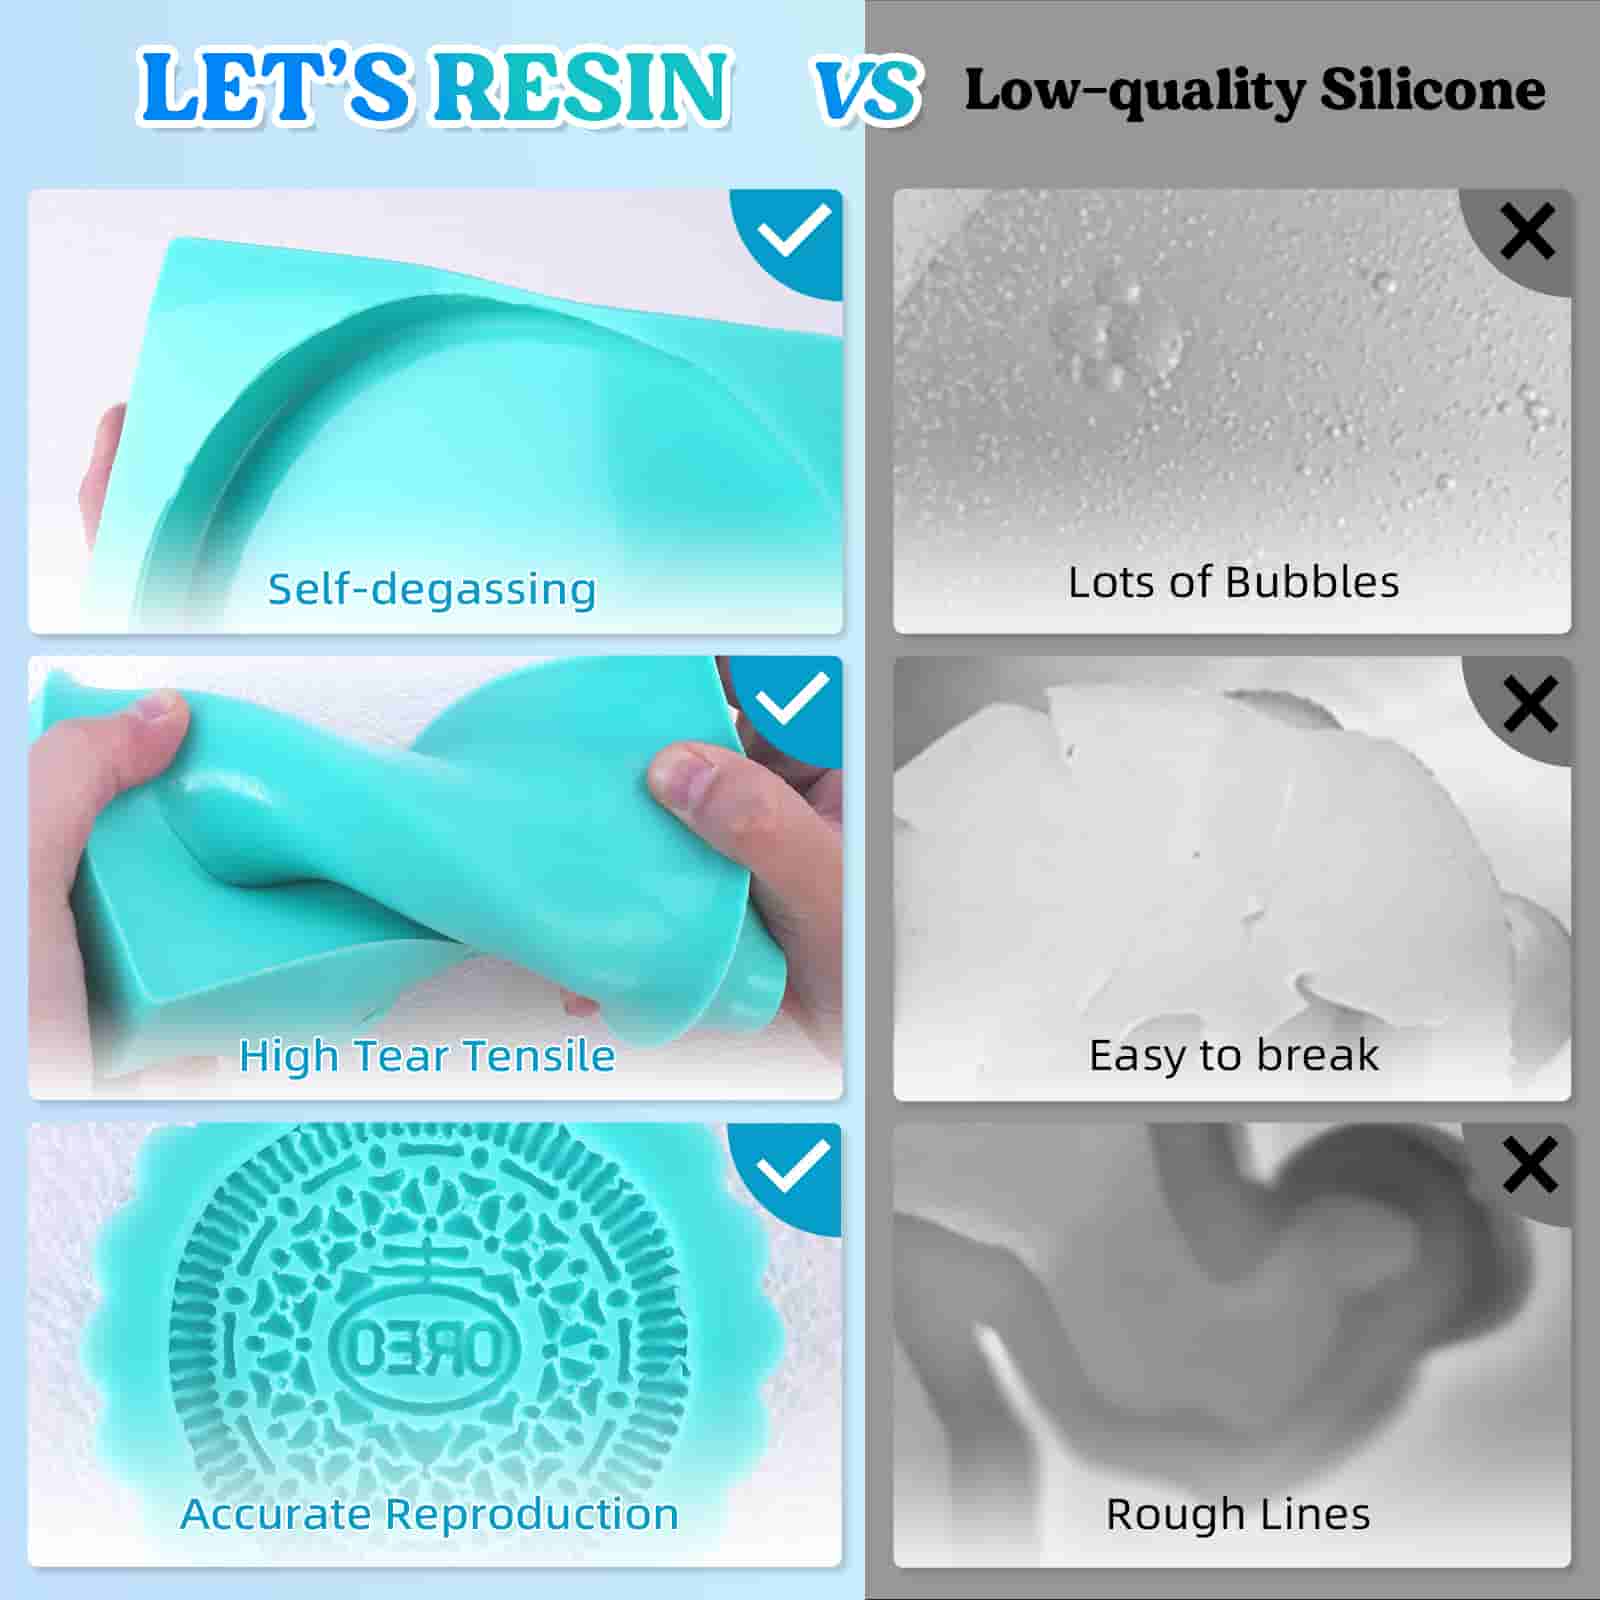 8 Most Common Reasons Resin Sticks to a Silicone Mold - MOY Resin Envy